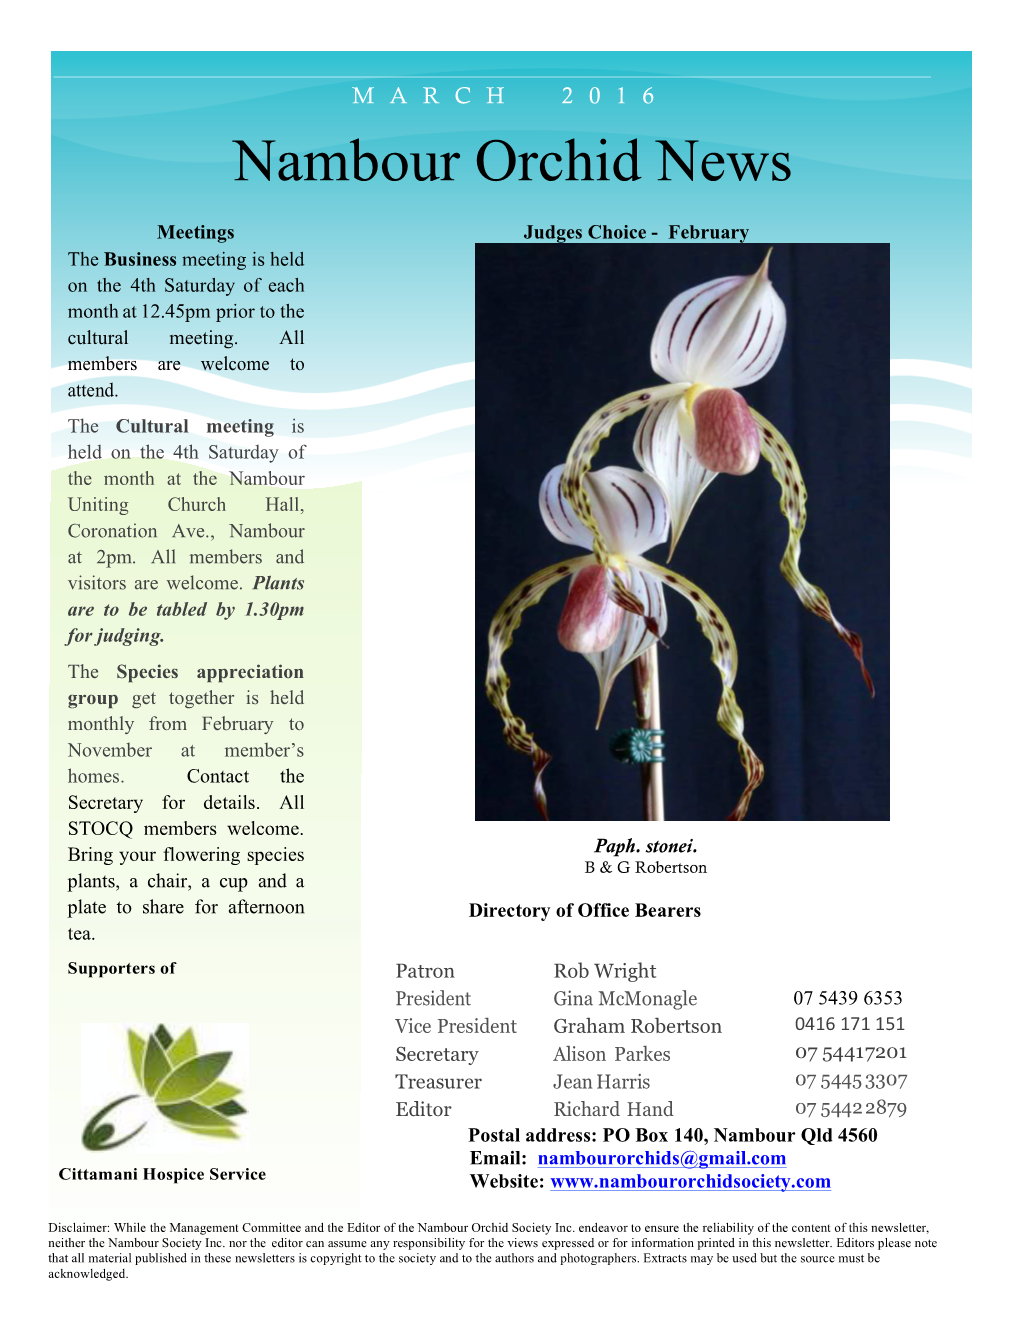 Nambour Orchid News